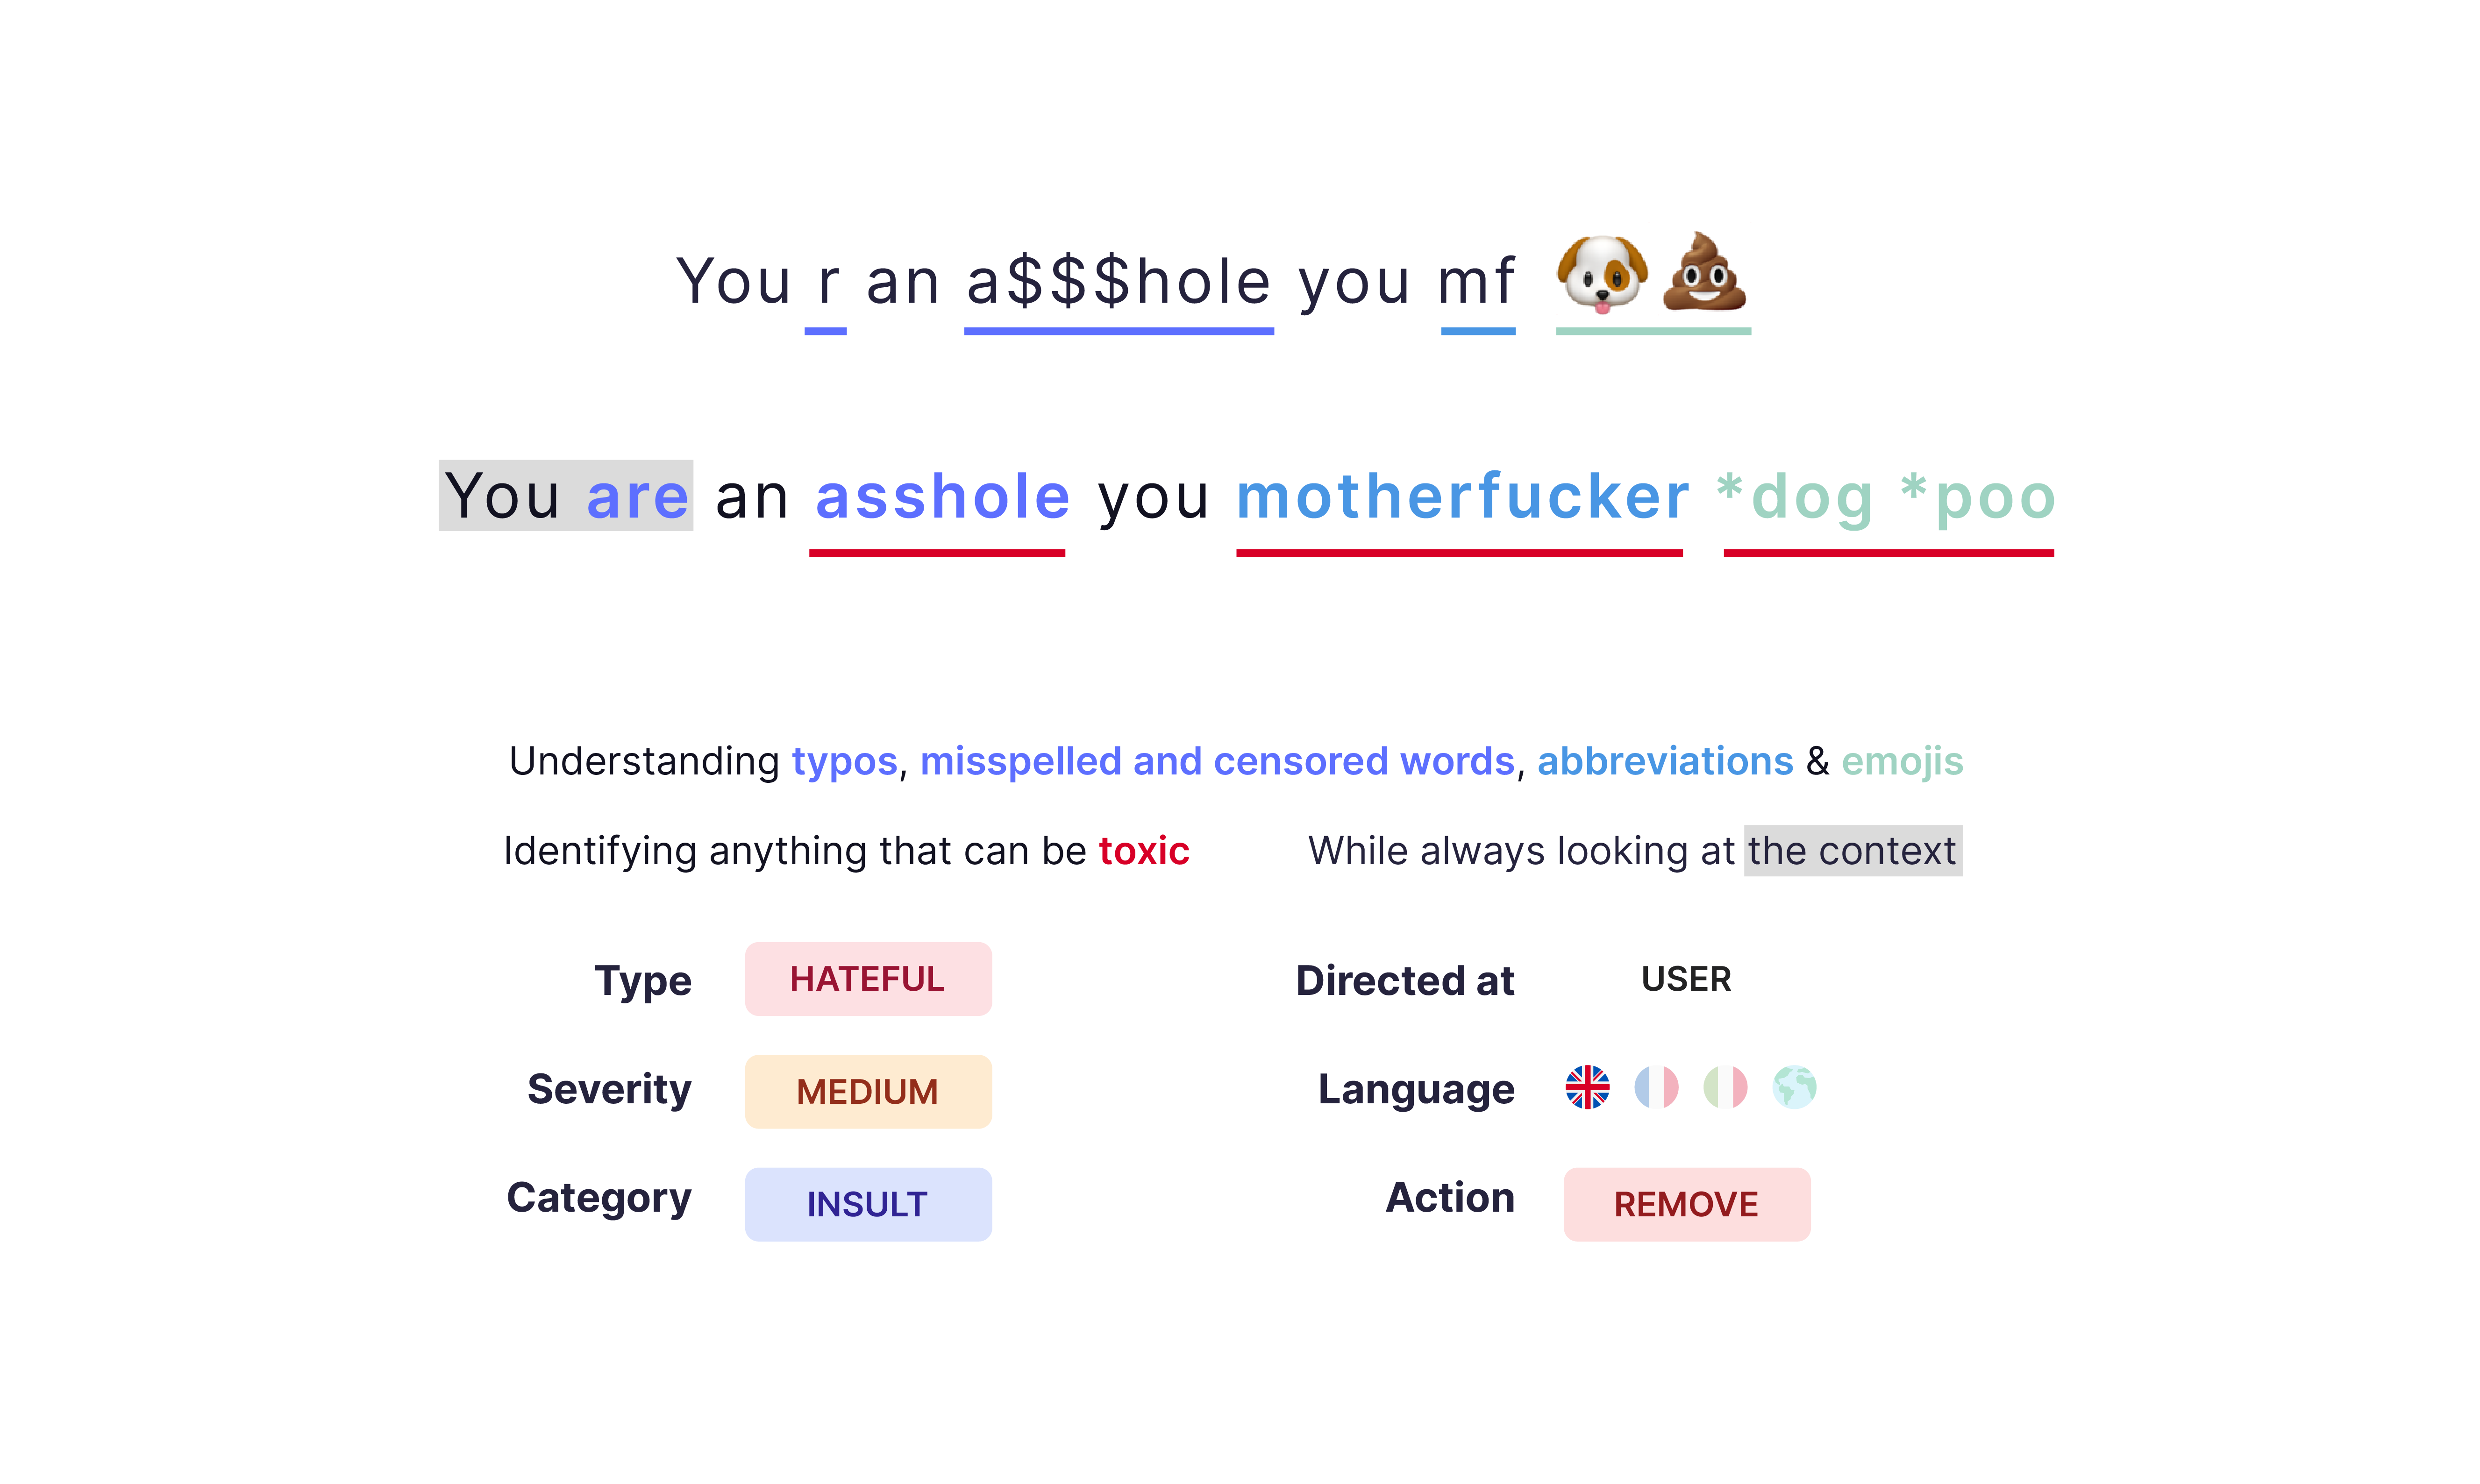 Smart moderation that detects potentially toxic content with advanced contextual analysis and identifies typos, misspelled or censored words, abbreviations and emojis.